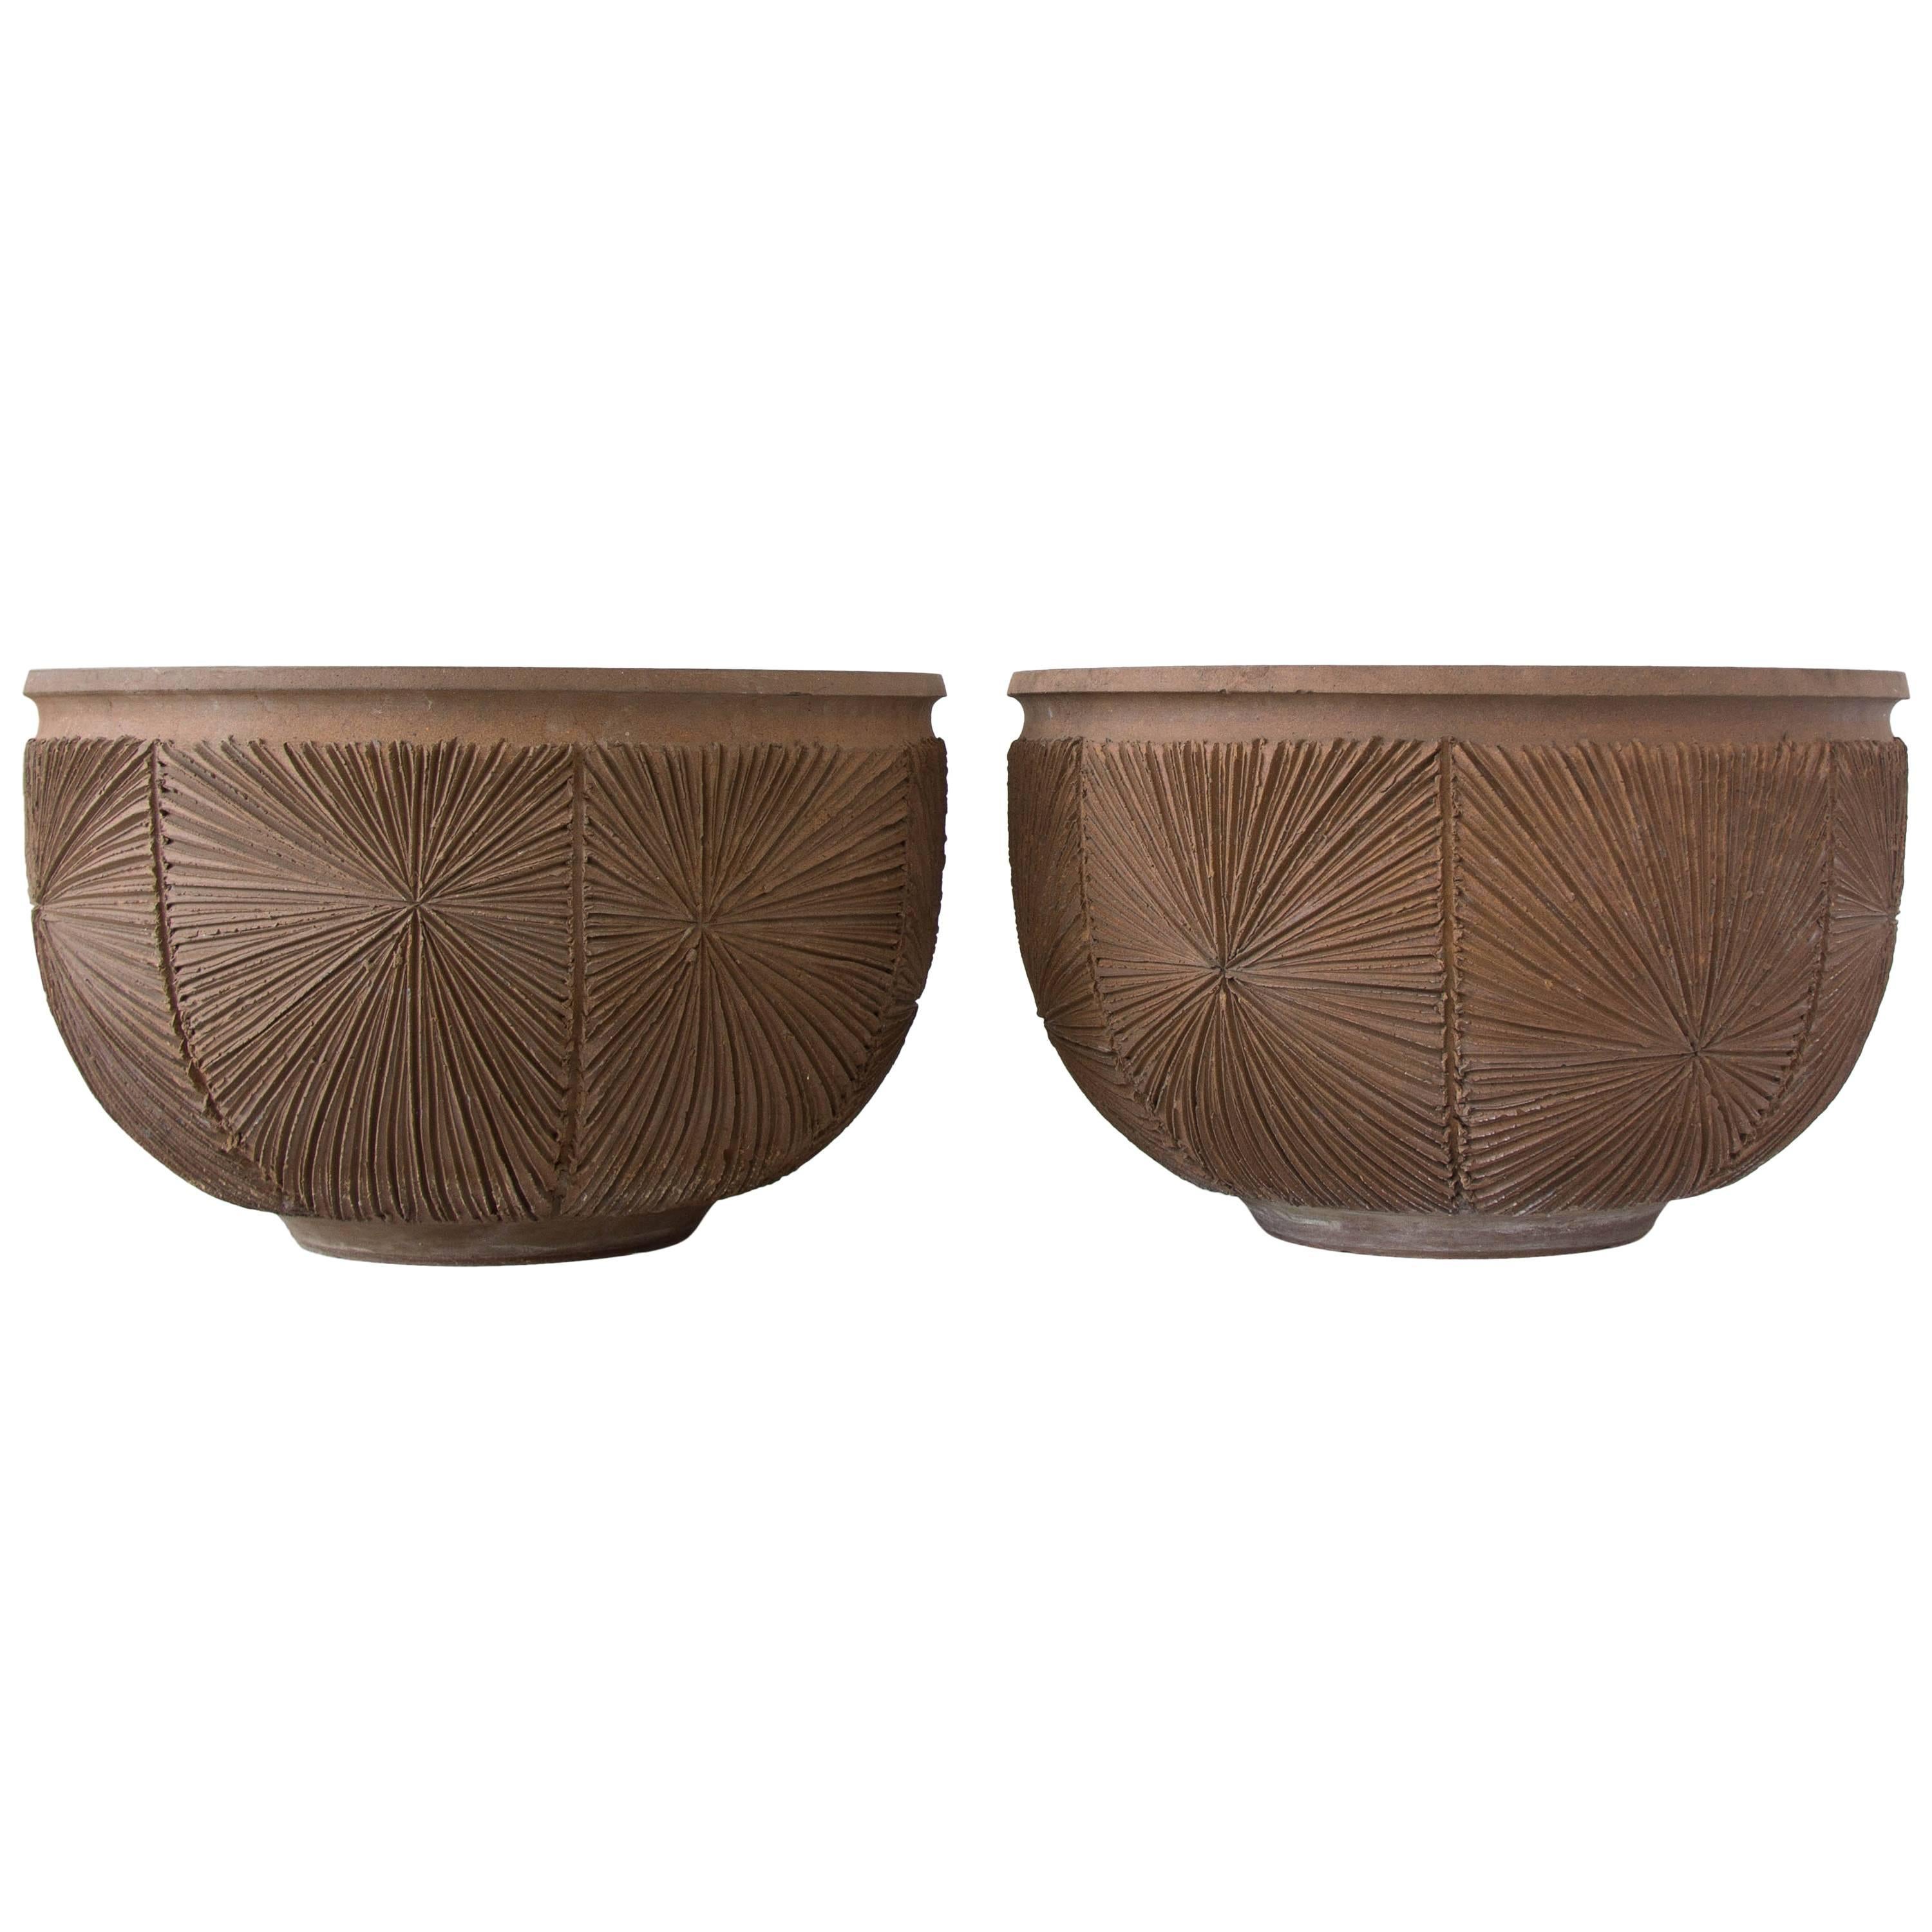 Pair of Robert Maxwell and David Cressey Earthgender Large Bowl Planters